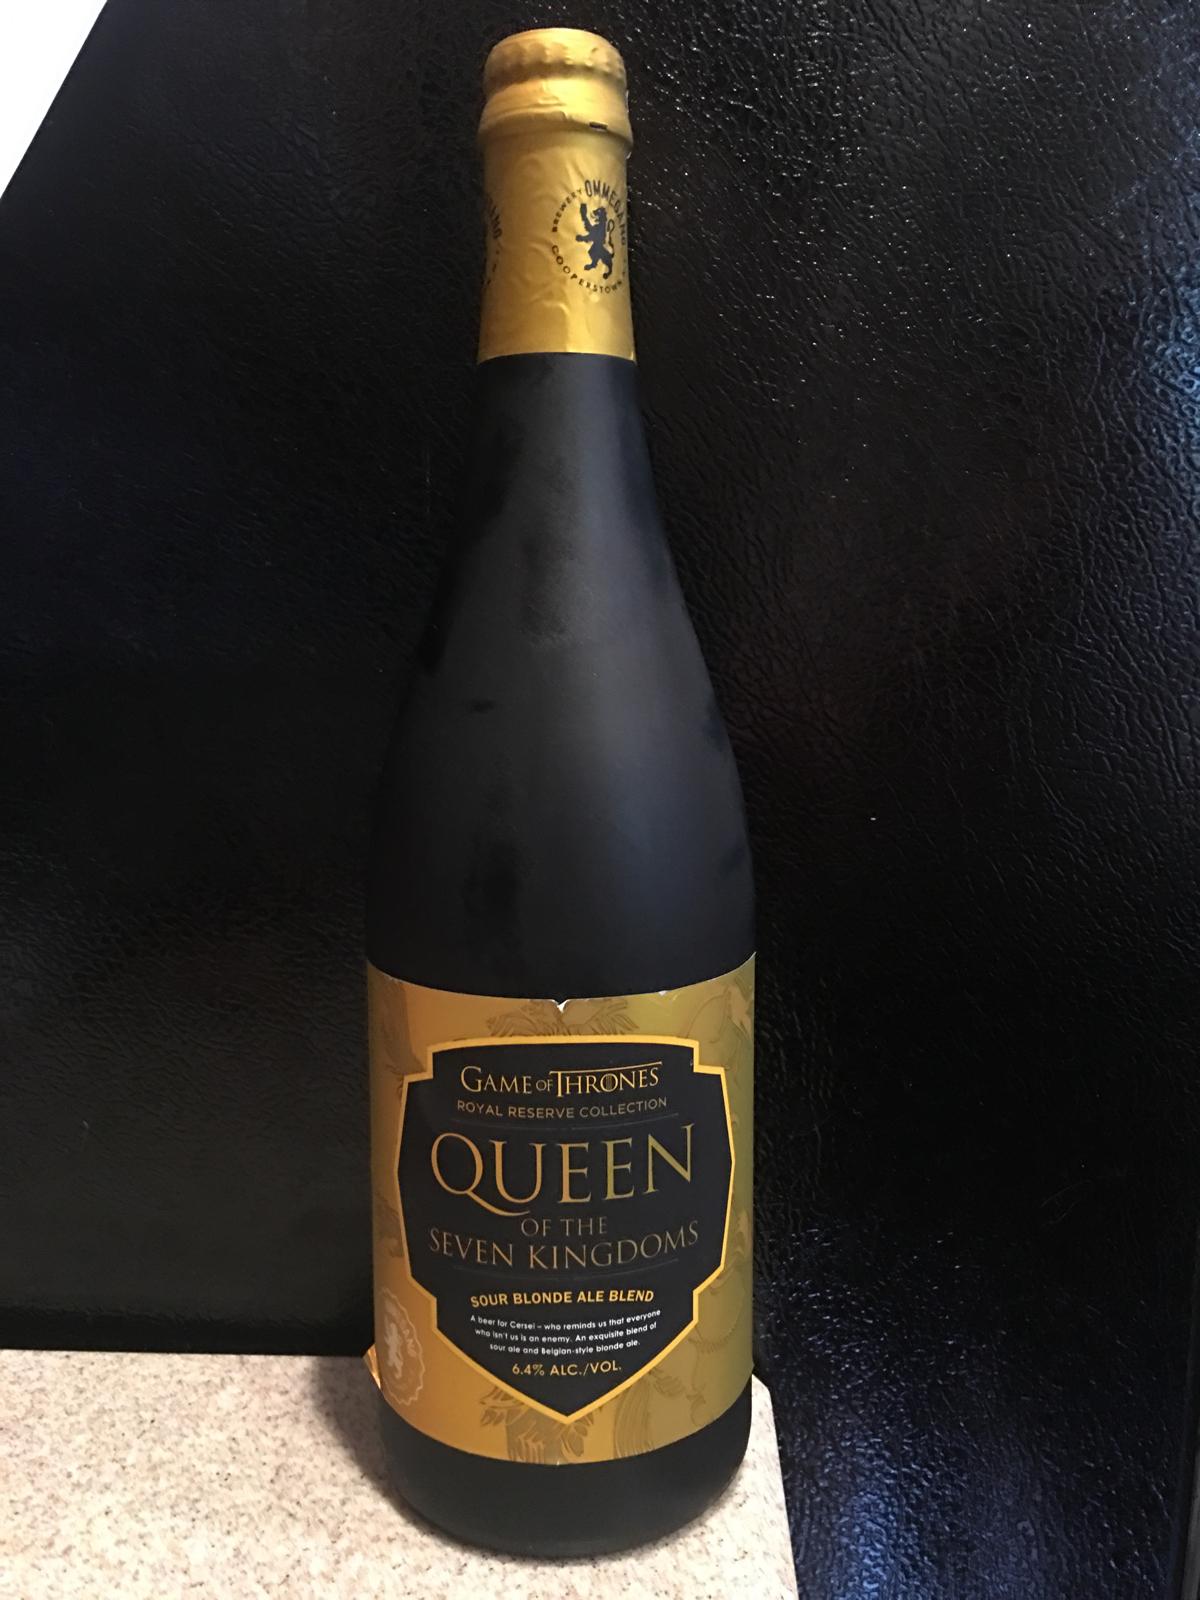 Game Of Thrones - Queen Of The Seven Kingdoms - Royal Reserve Collection